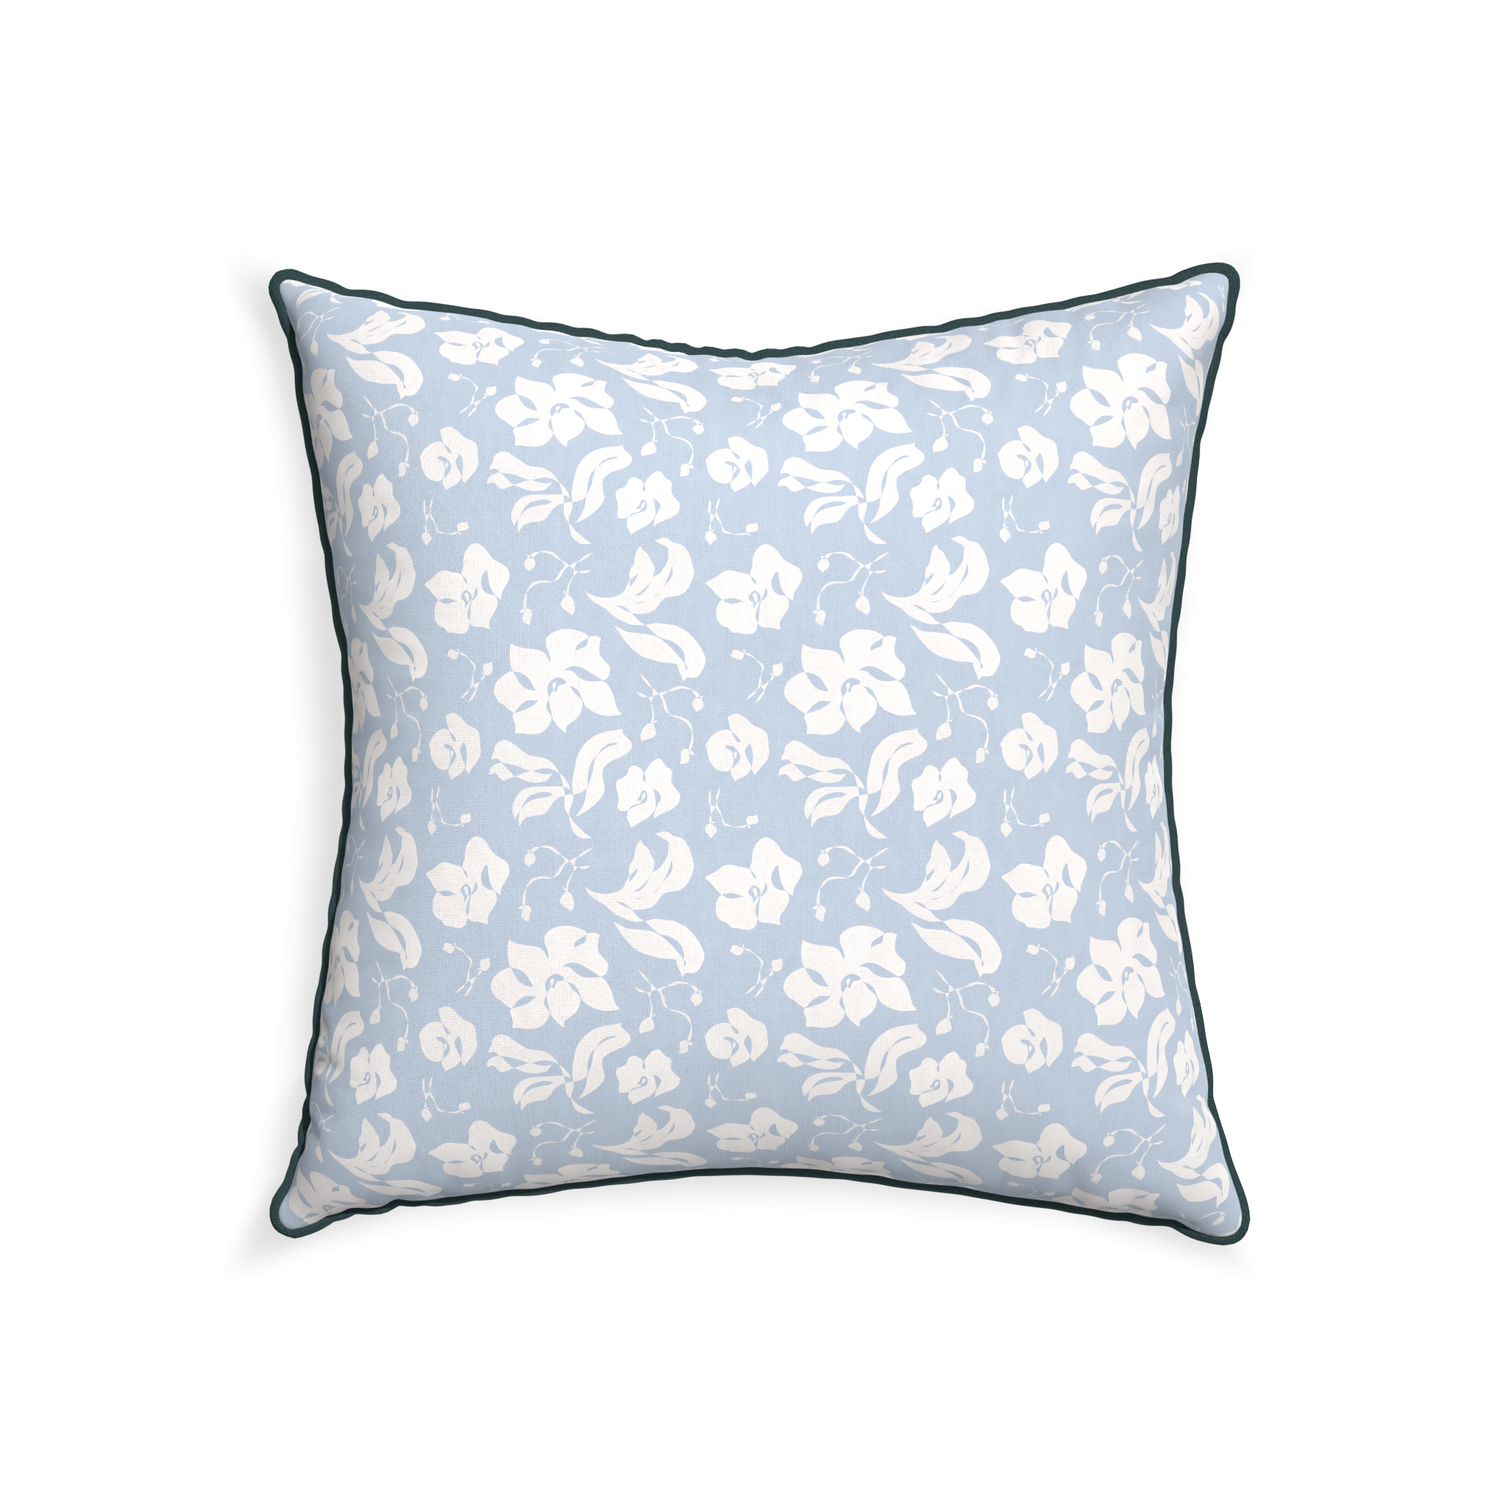 22-square georgia custom cornflower blue floralpillow with p piping on white background